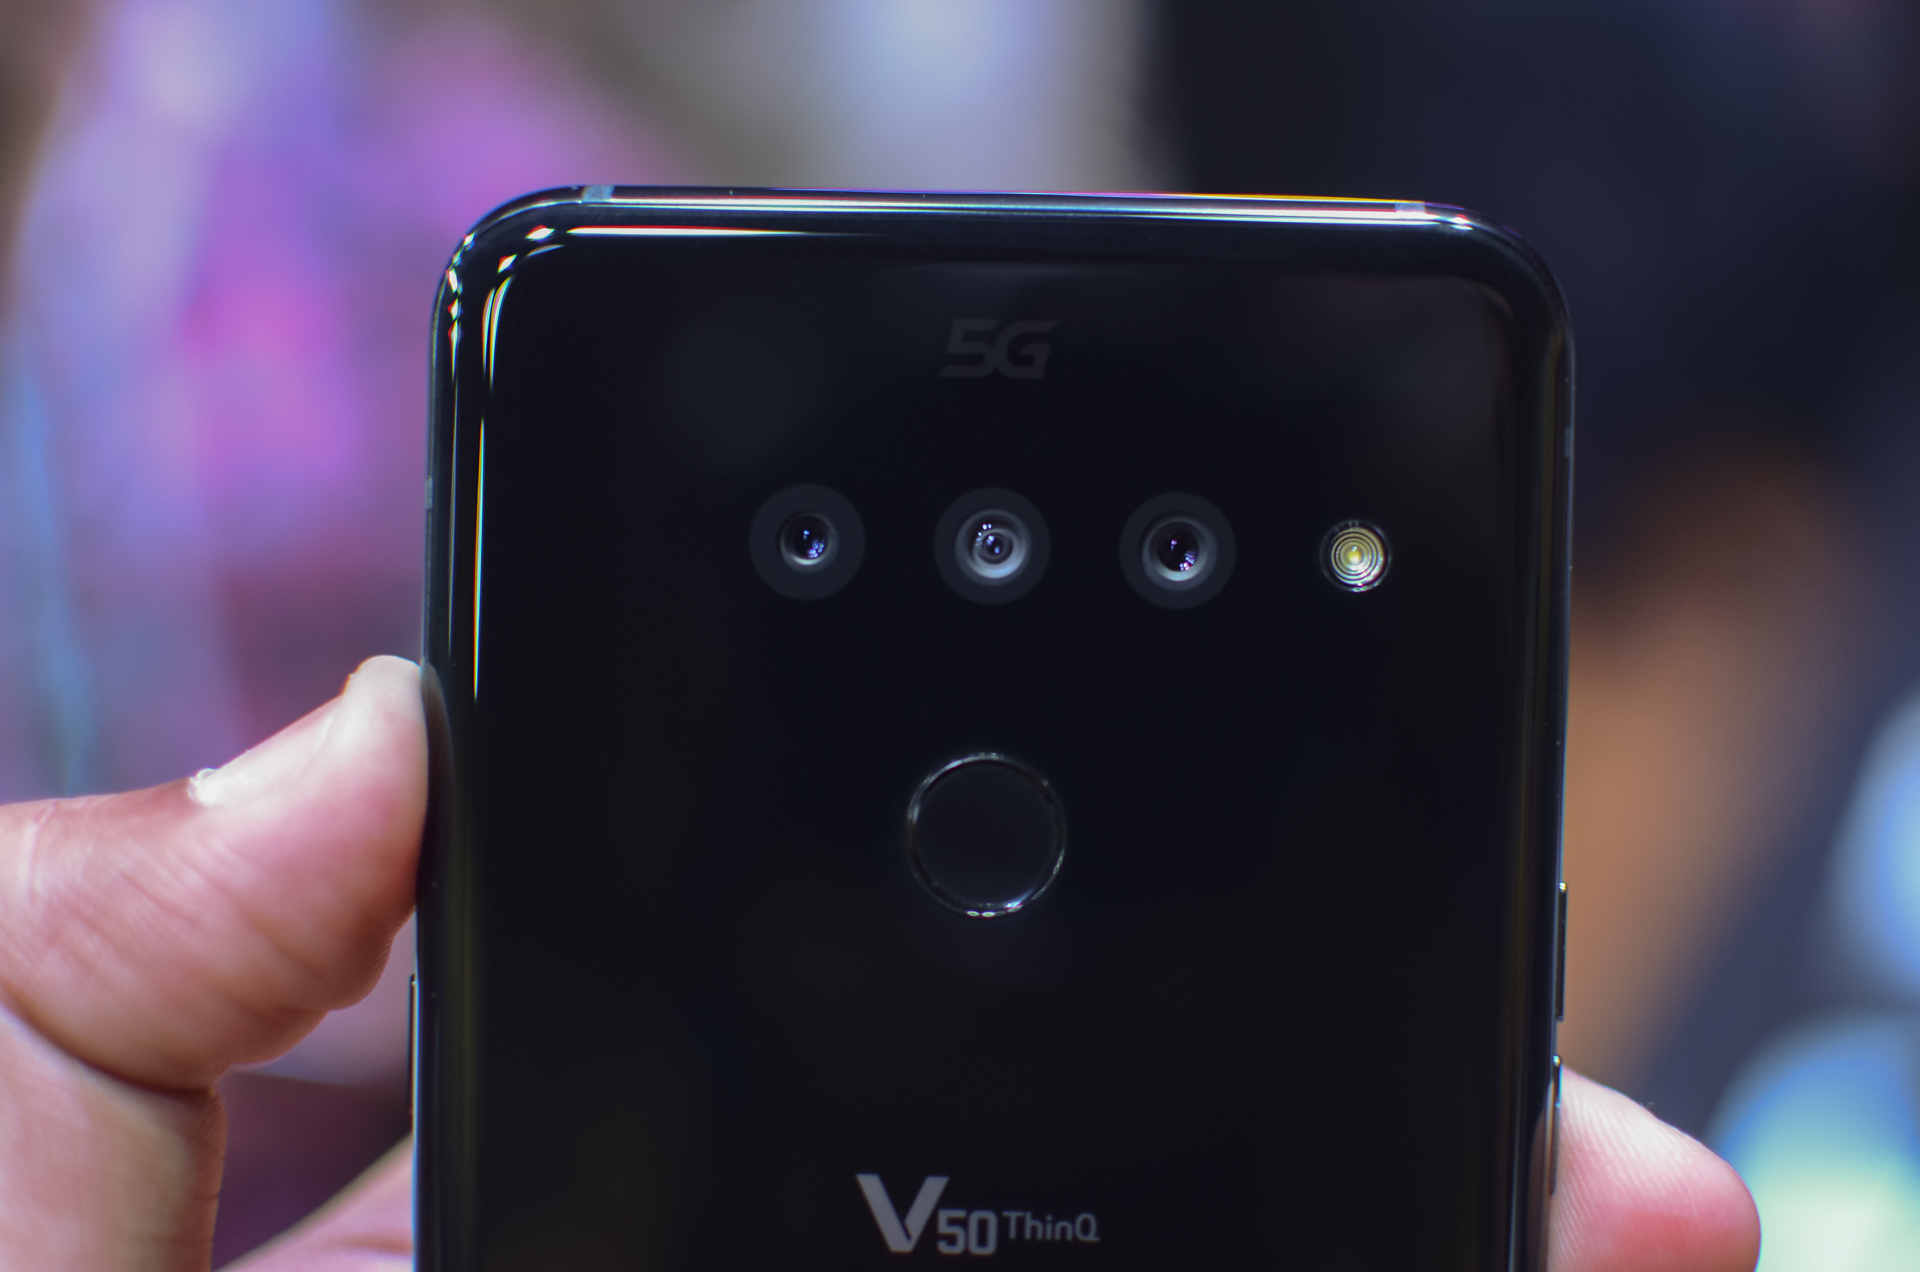 LG V50 ThinQ Hands-on Review: Notable Upgrades, Lacking